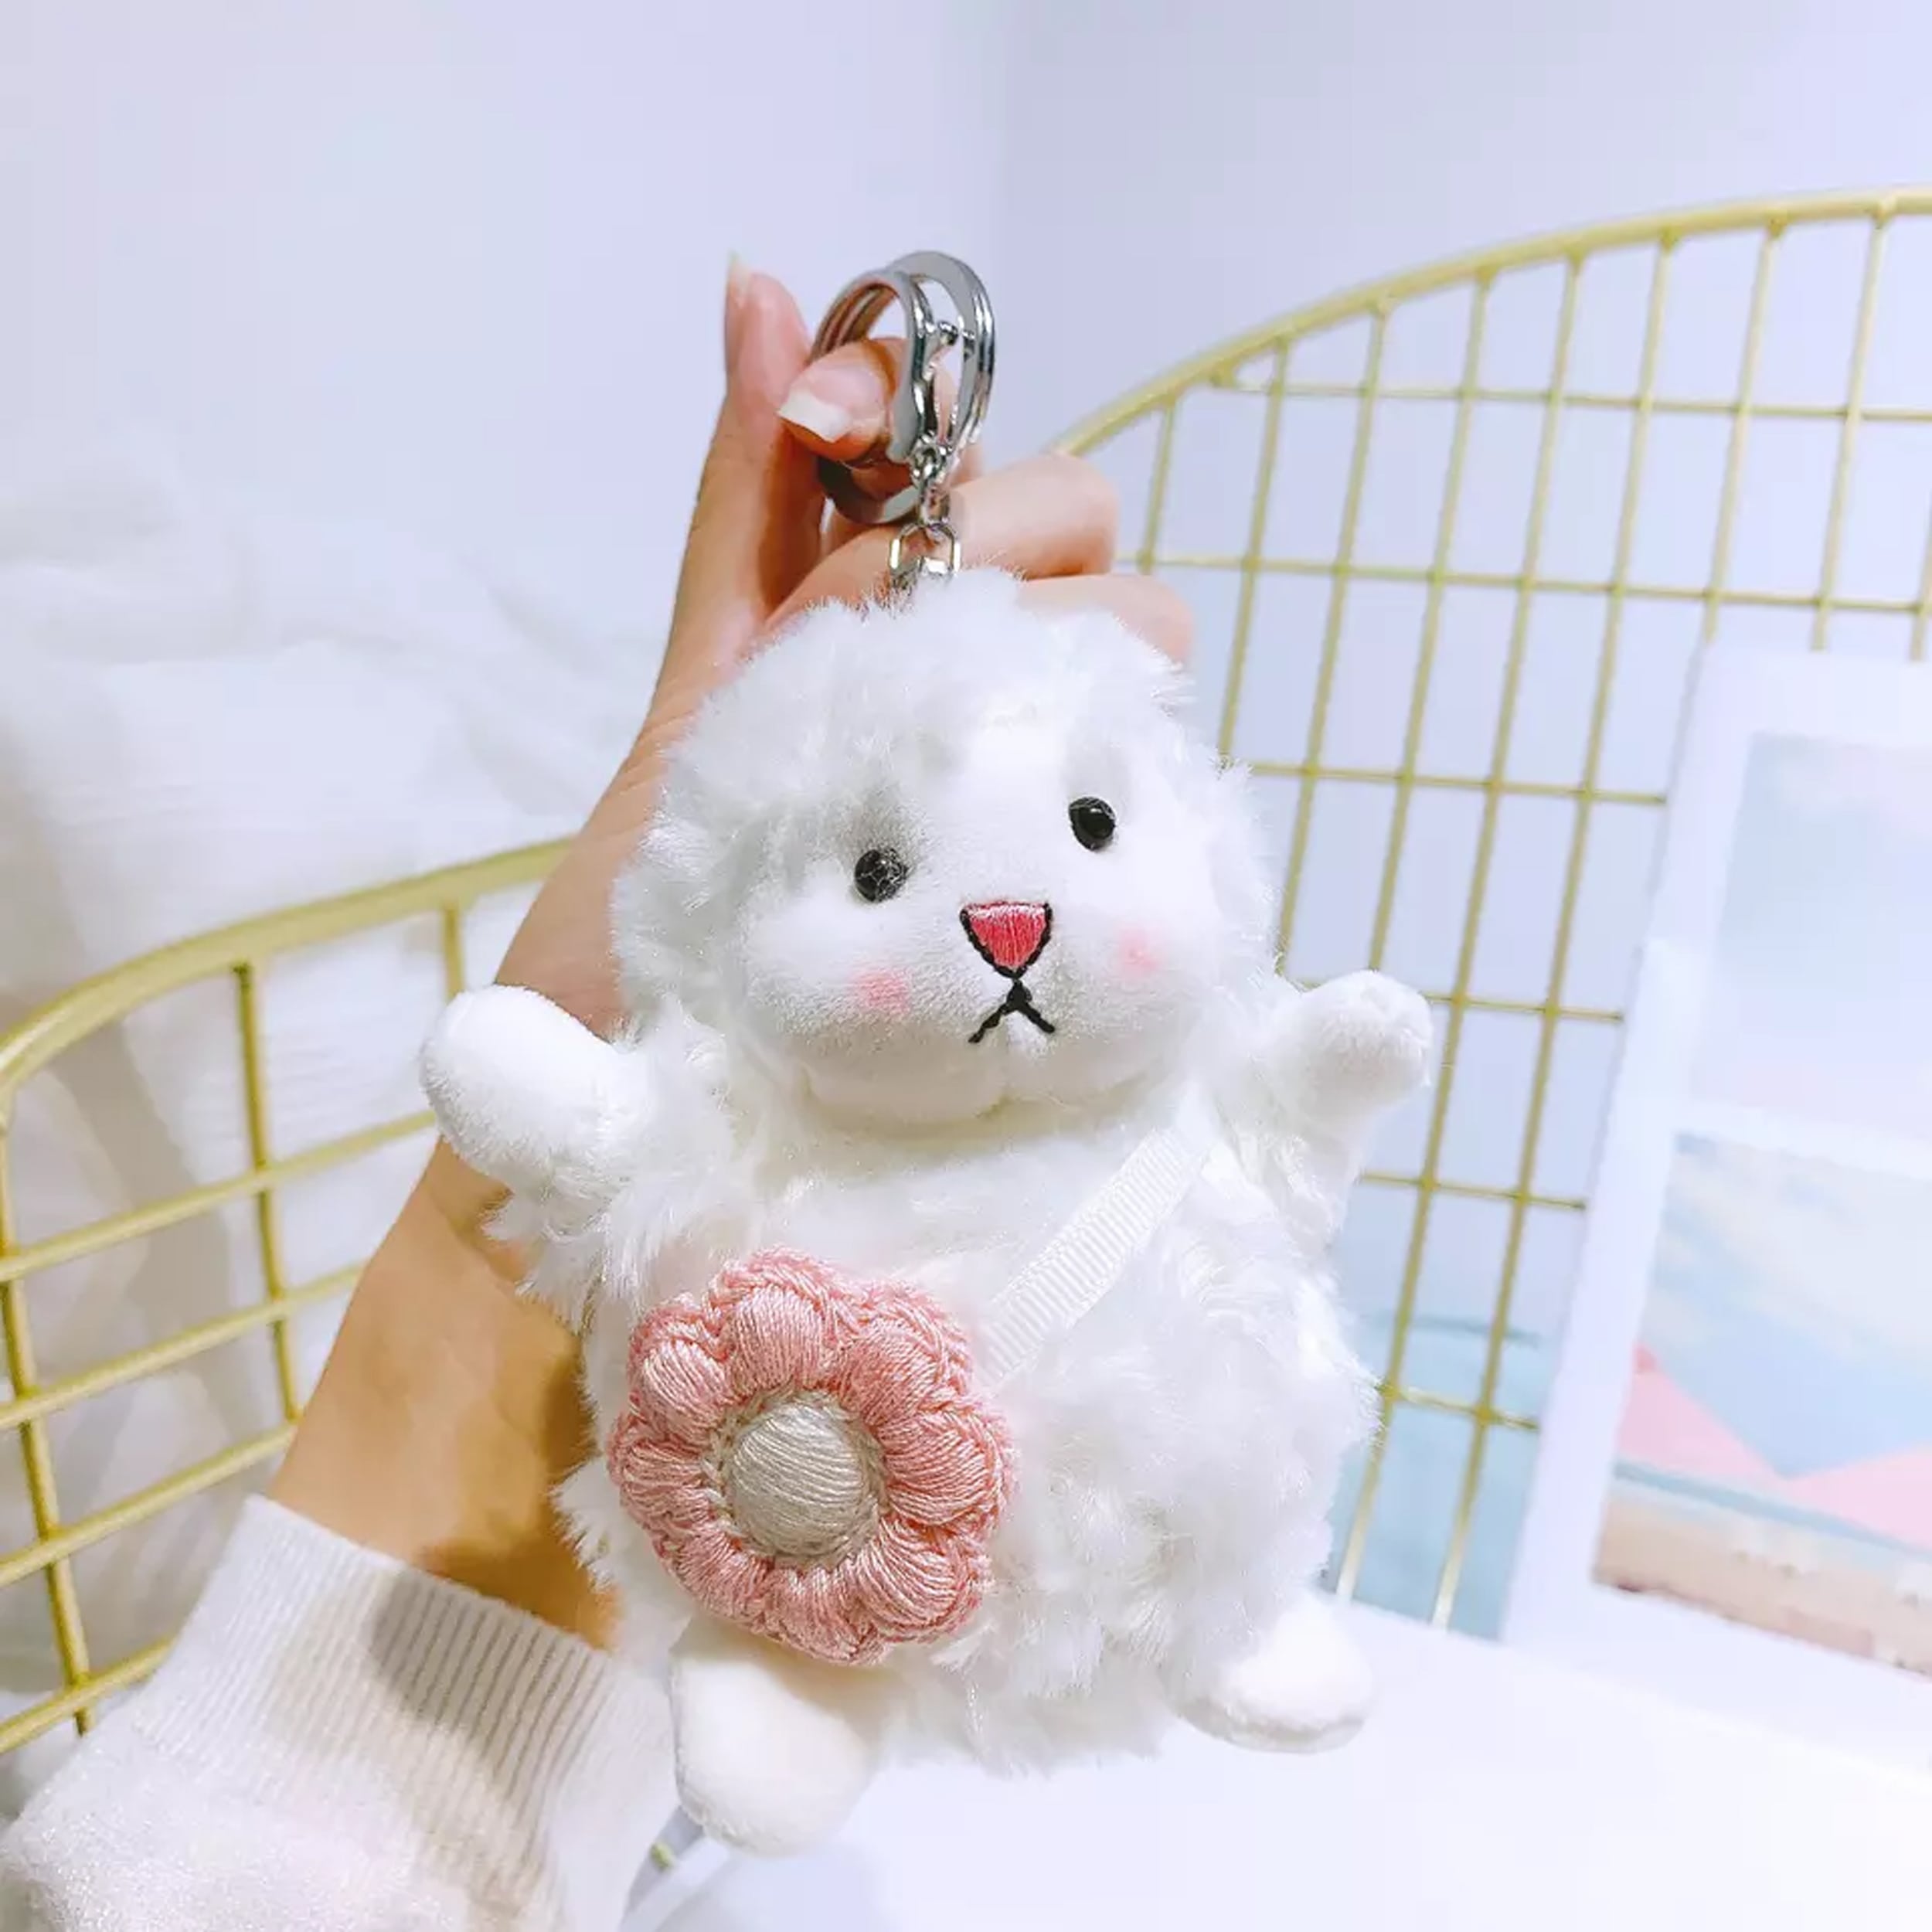 Shop Wholesale White Sheep Alpaca Keychains - Add Some Fluffy Fun to Your Keys